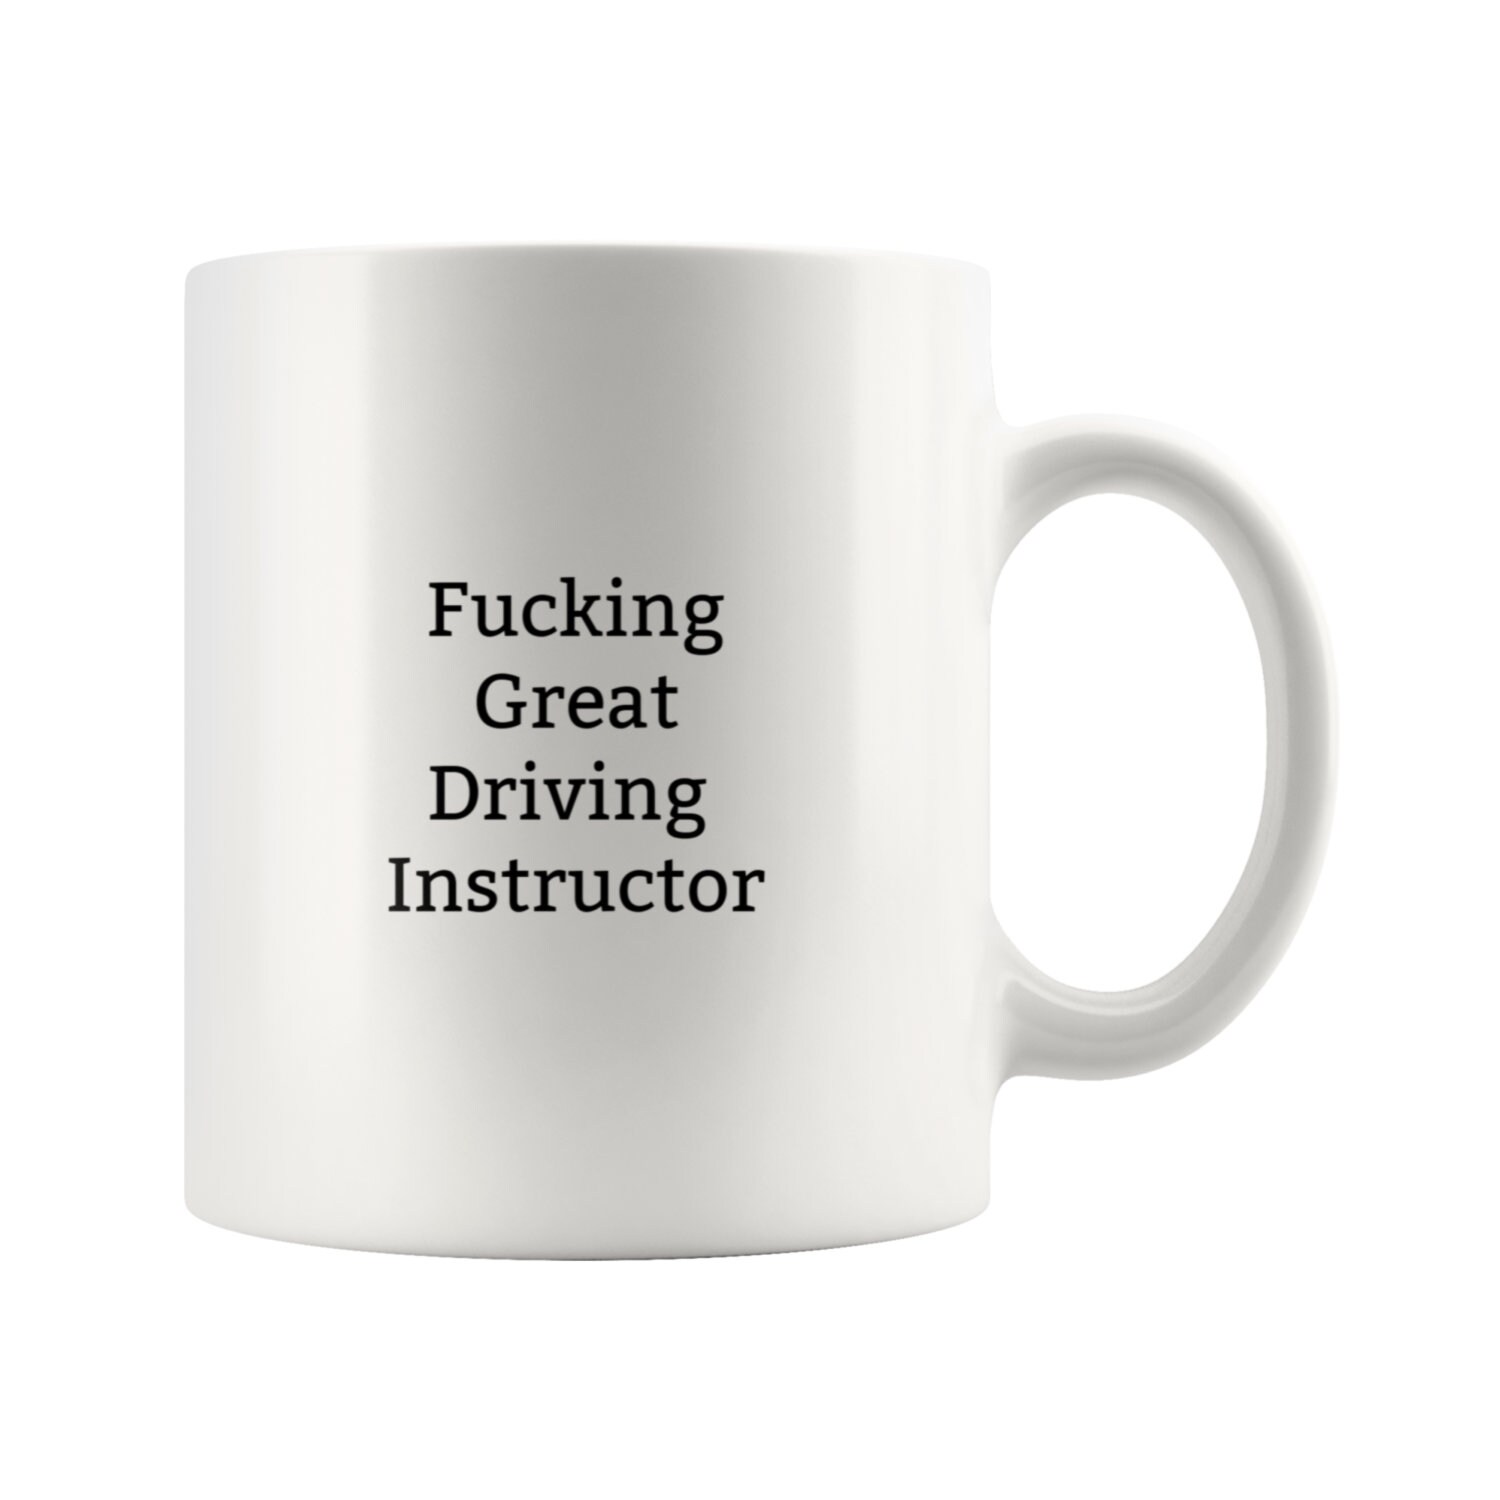 Makes an Ideal Gift World's Greatest Driving Instructor Ceramic Coffee Mug 